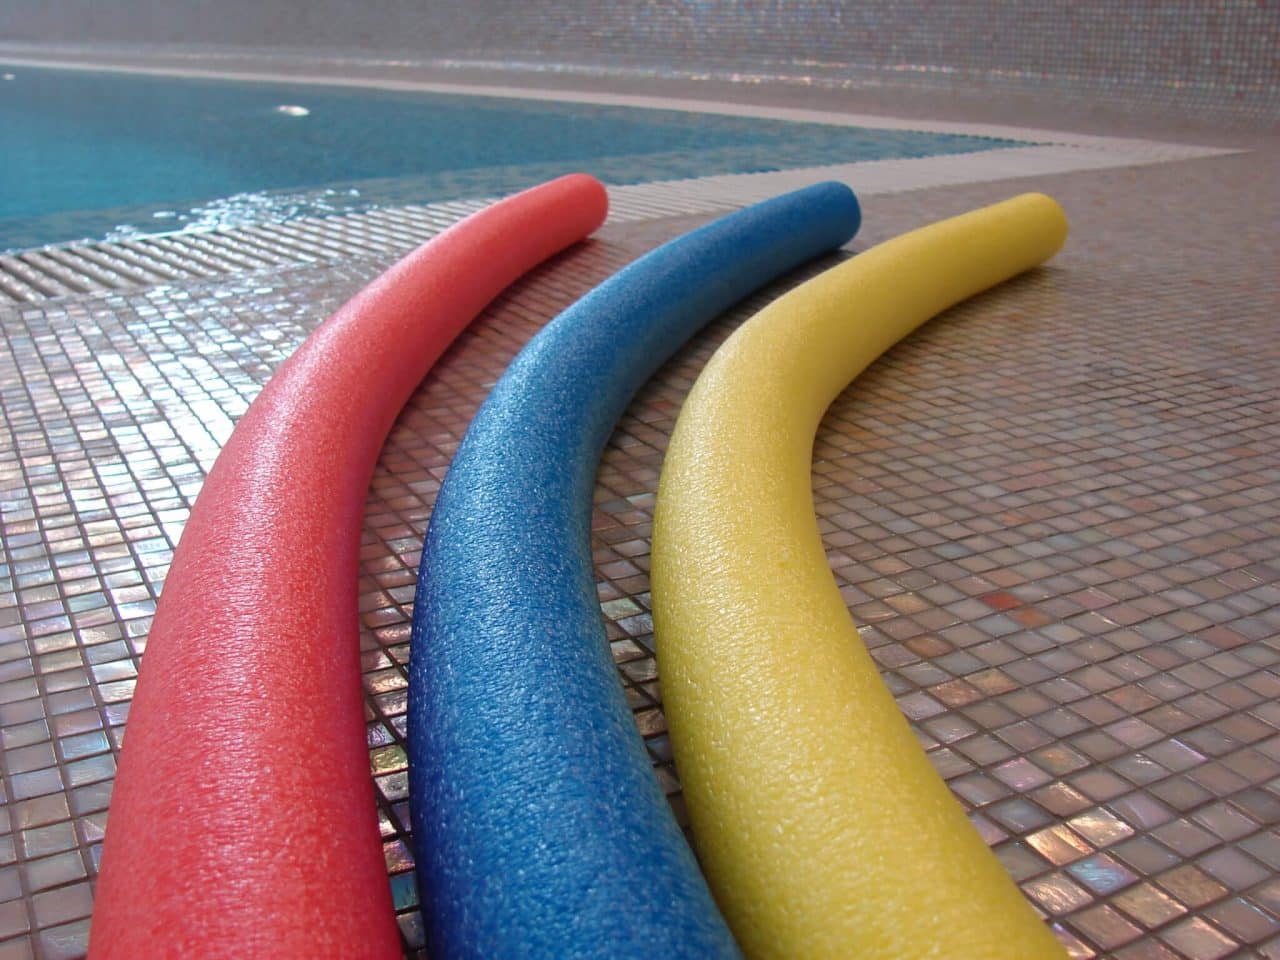 Three pool noodles laying on the ground next to an indoor swimming pool.